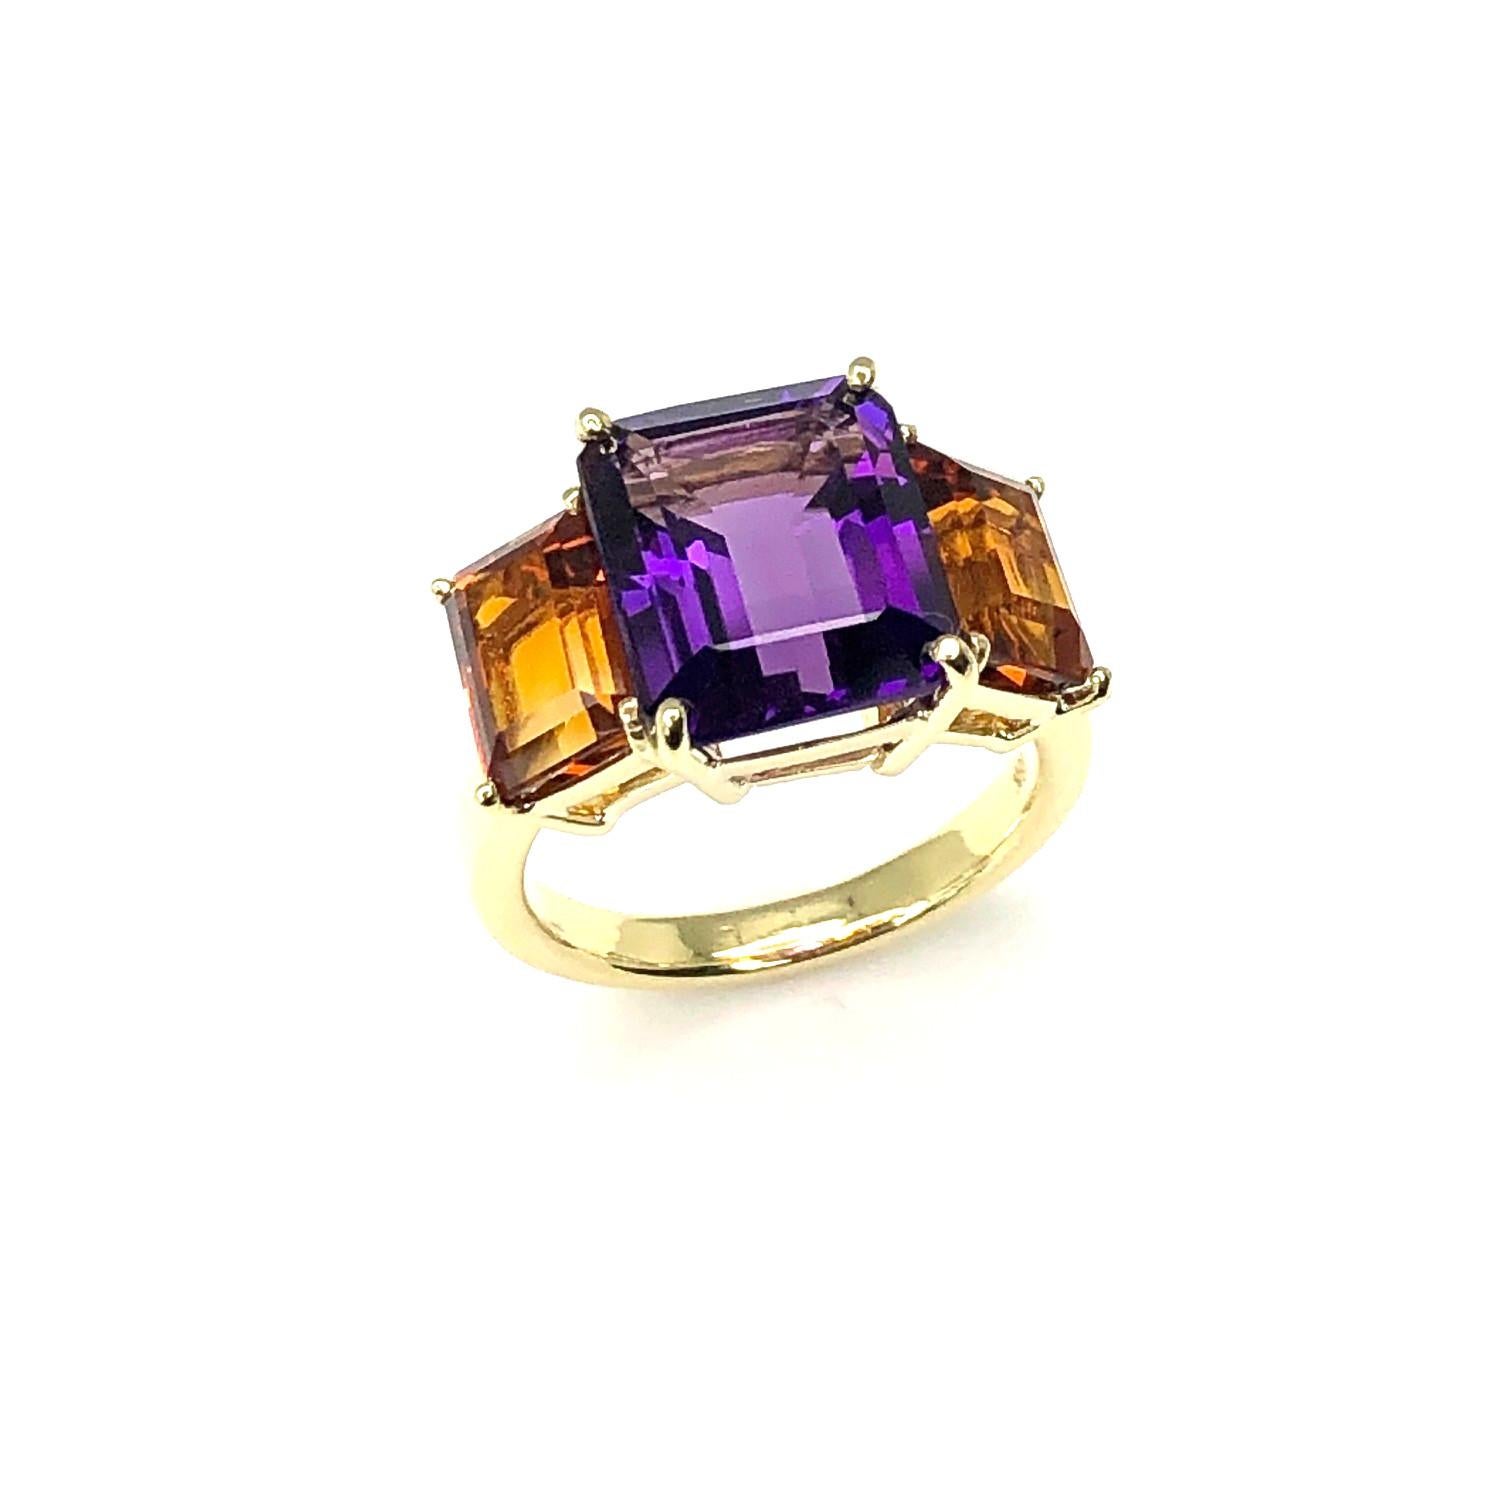 This pretty 3-stone cocktail ring features emerald-cut amethyst paired with intense citrine to show off  two beautiful colors of the same gem mineral! The amethyst is a beautiful, royal purple color and the citrine are fine 